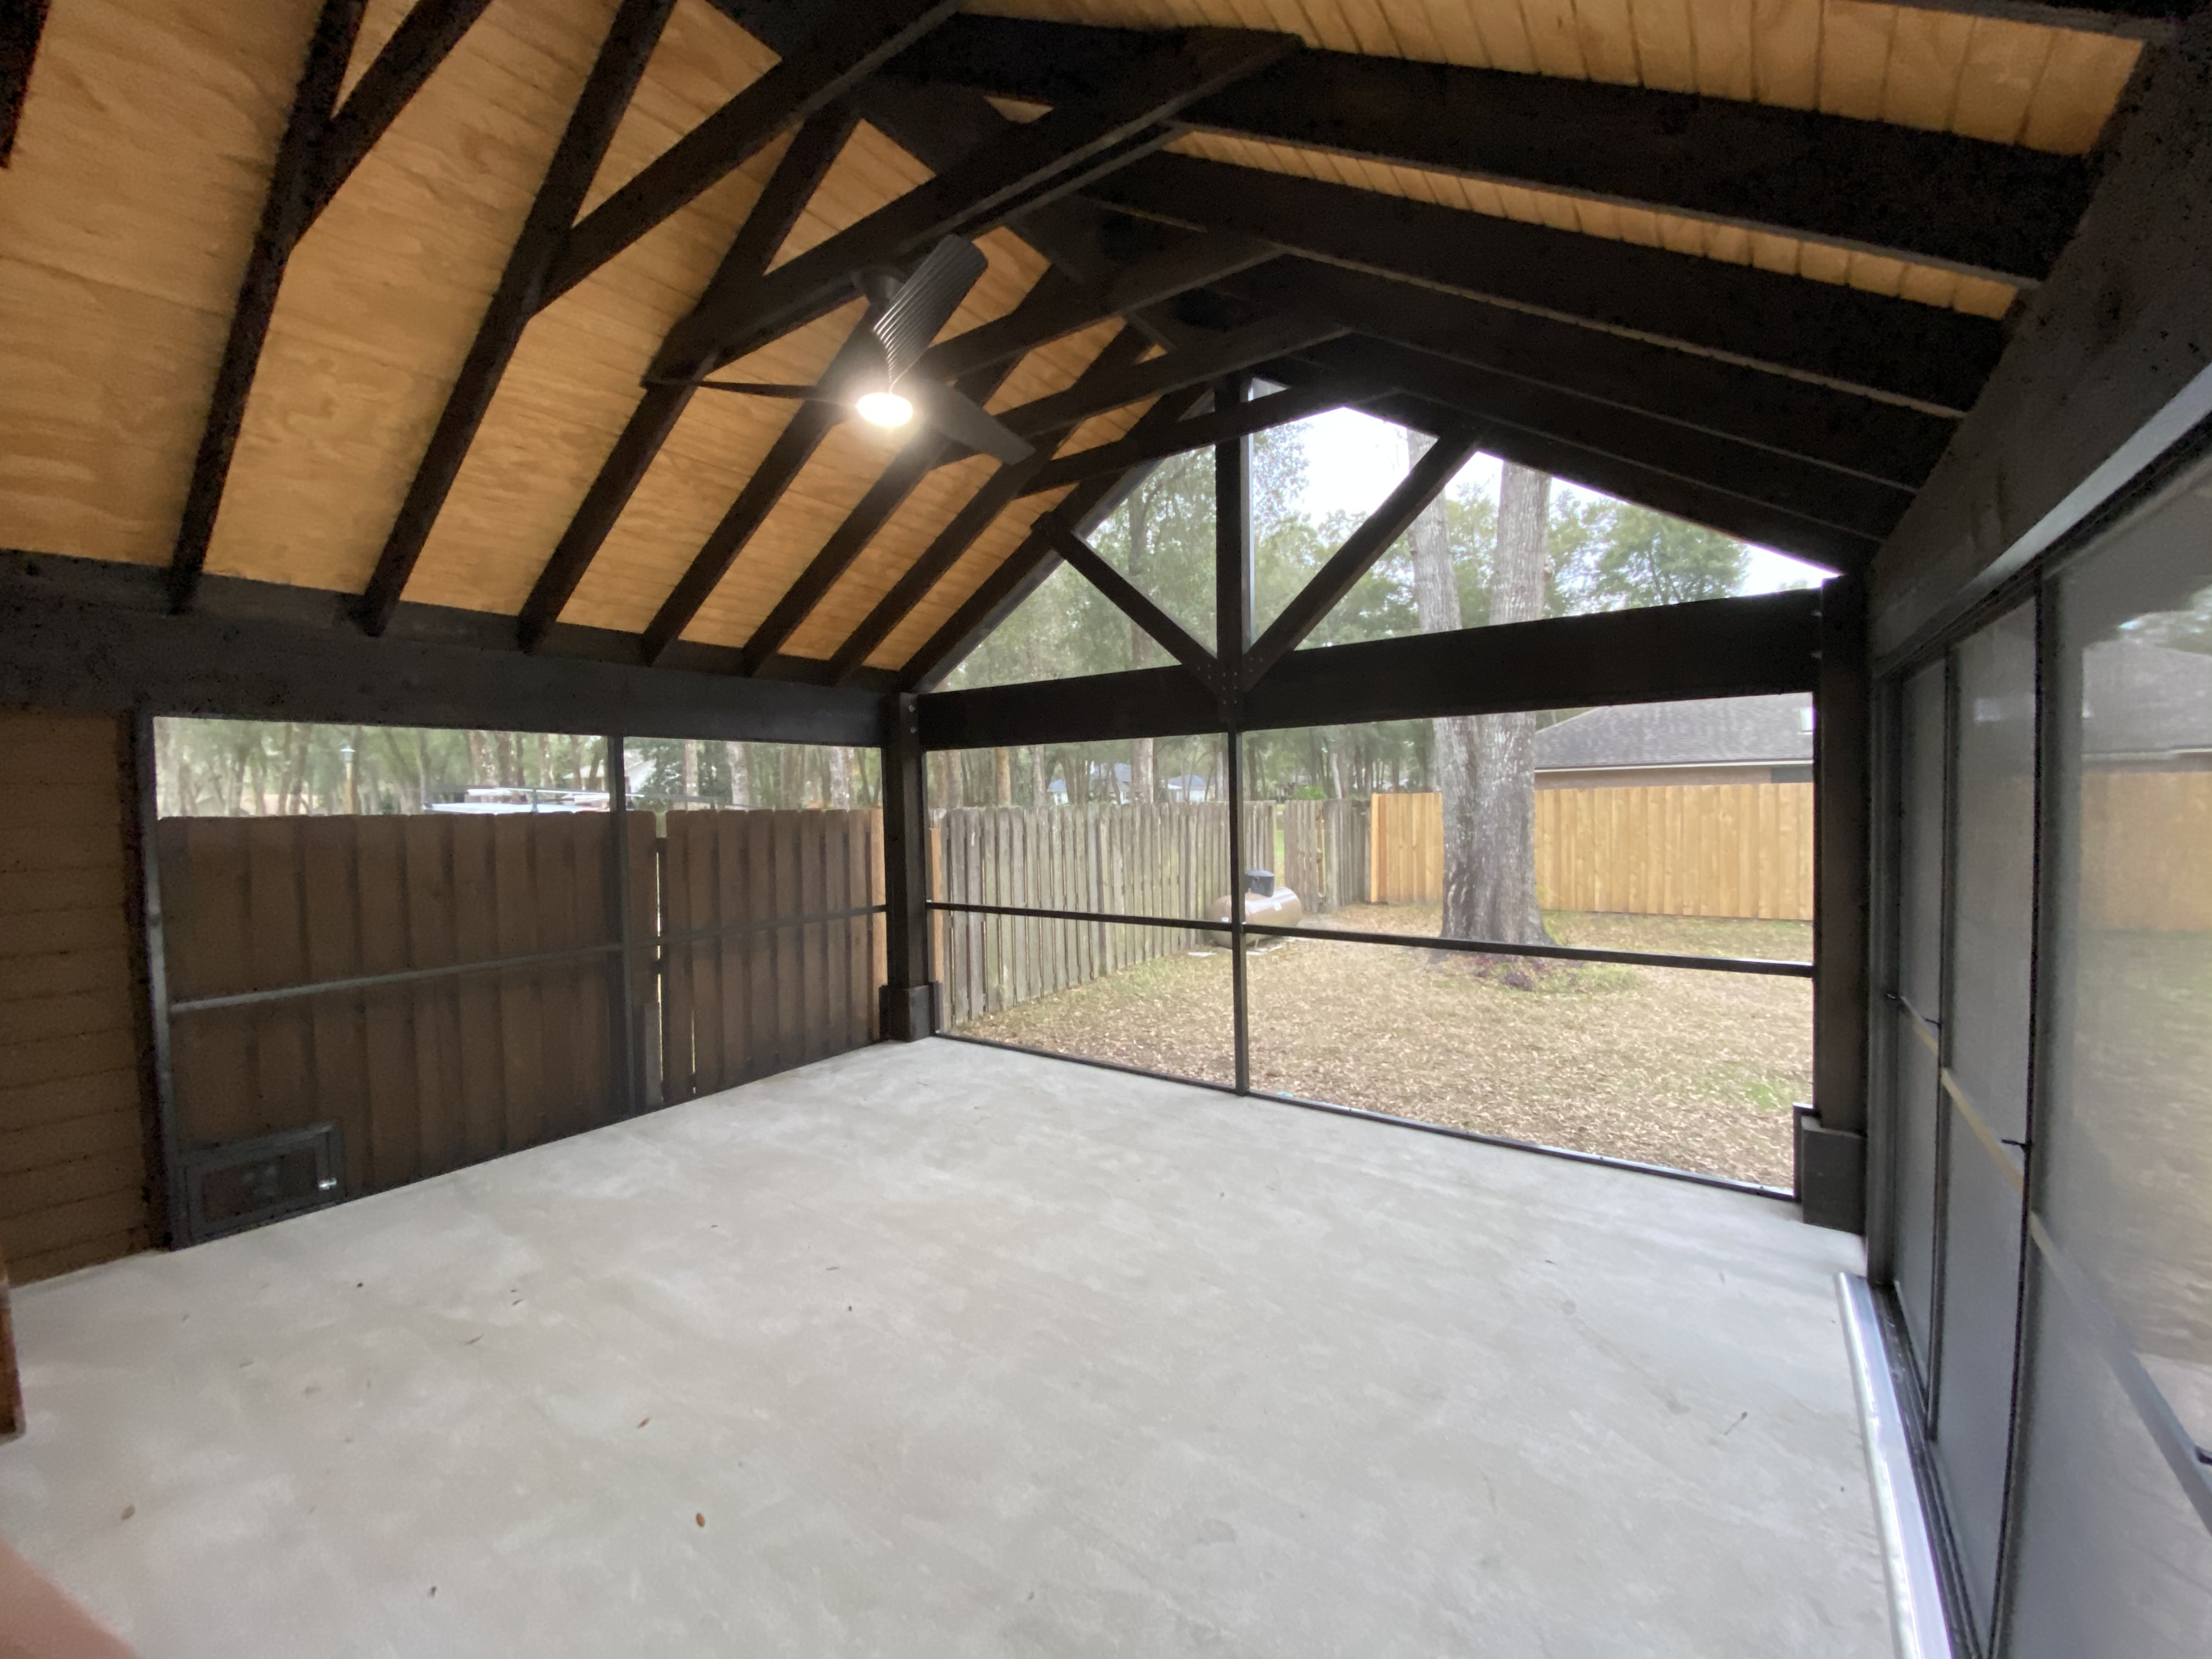 This beautiful screened-in lanai has a very high roof with exposed beams, electrical, and a ceiling fan with light. Screen Enclosures and More takes pride in the custom projects we build and design for our clients.